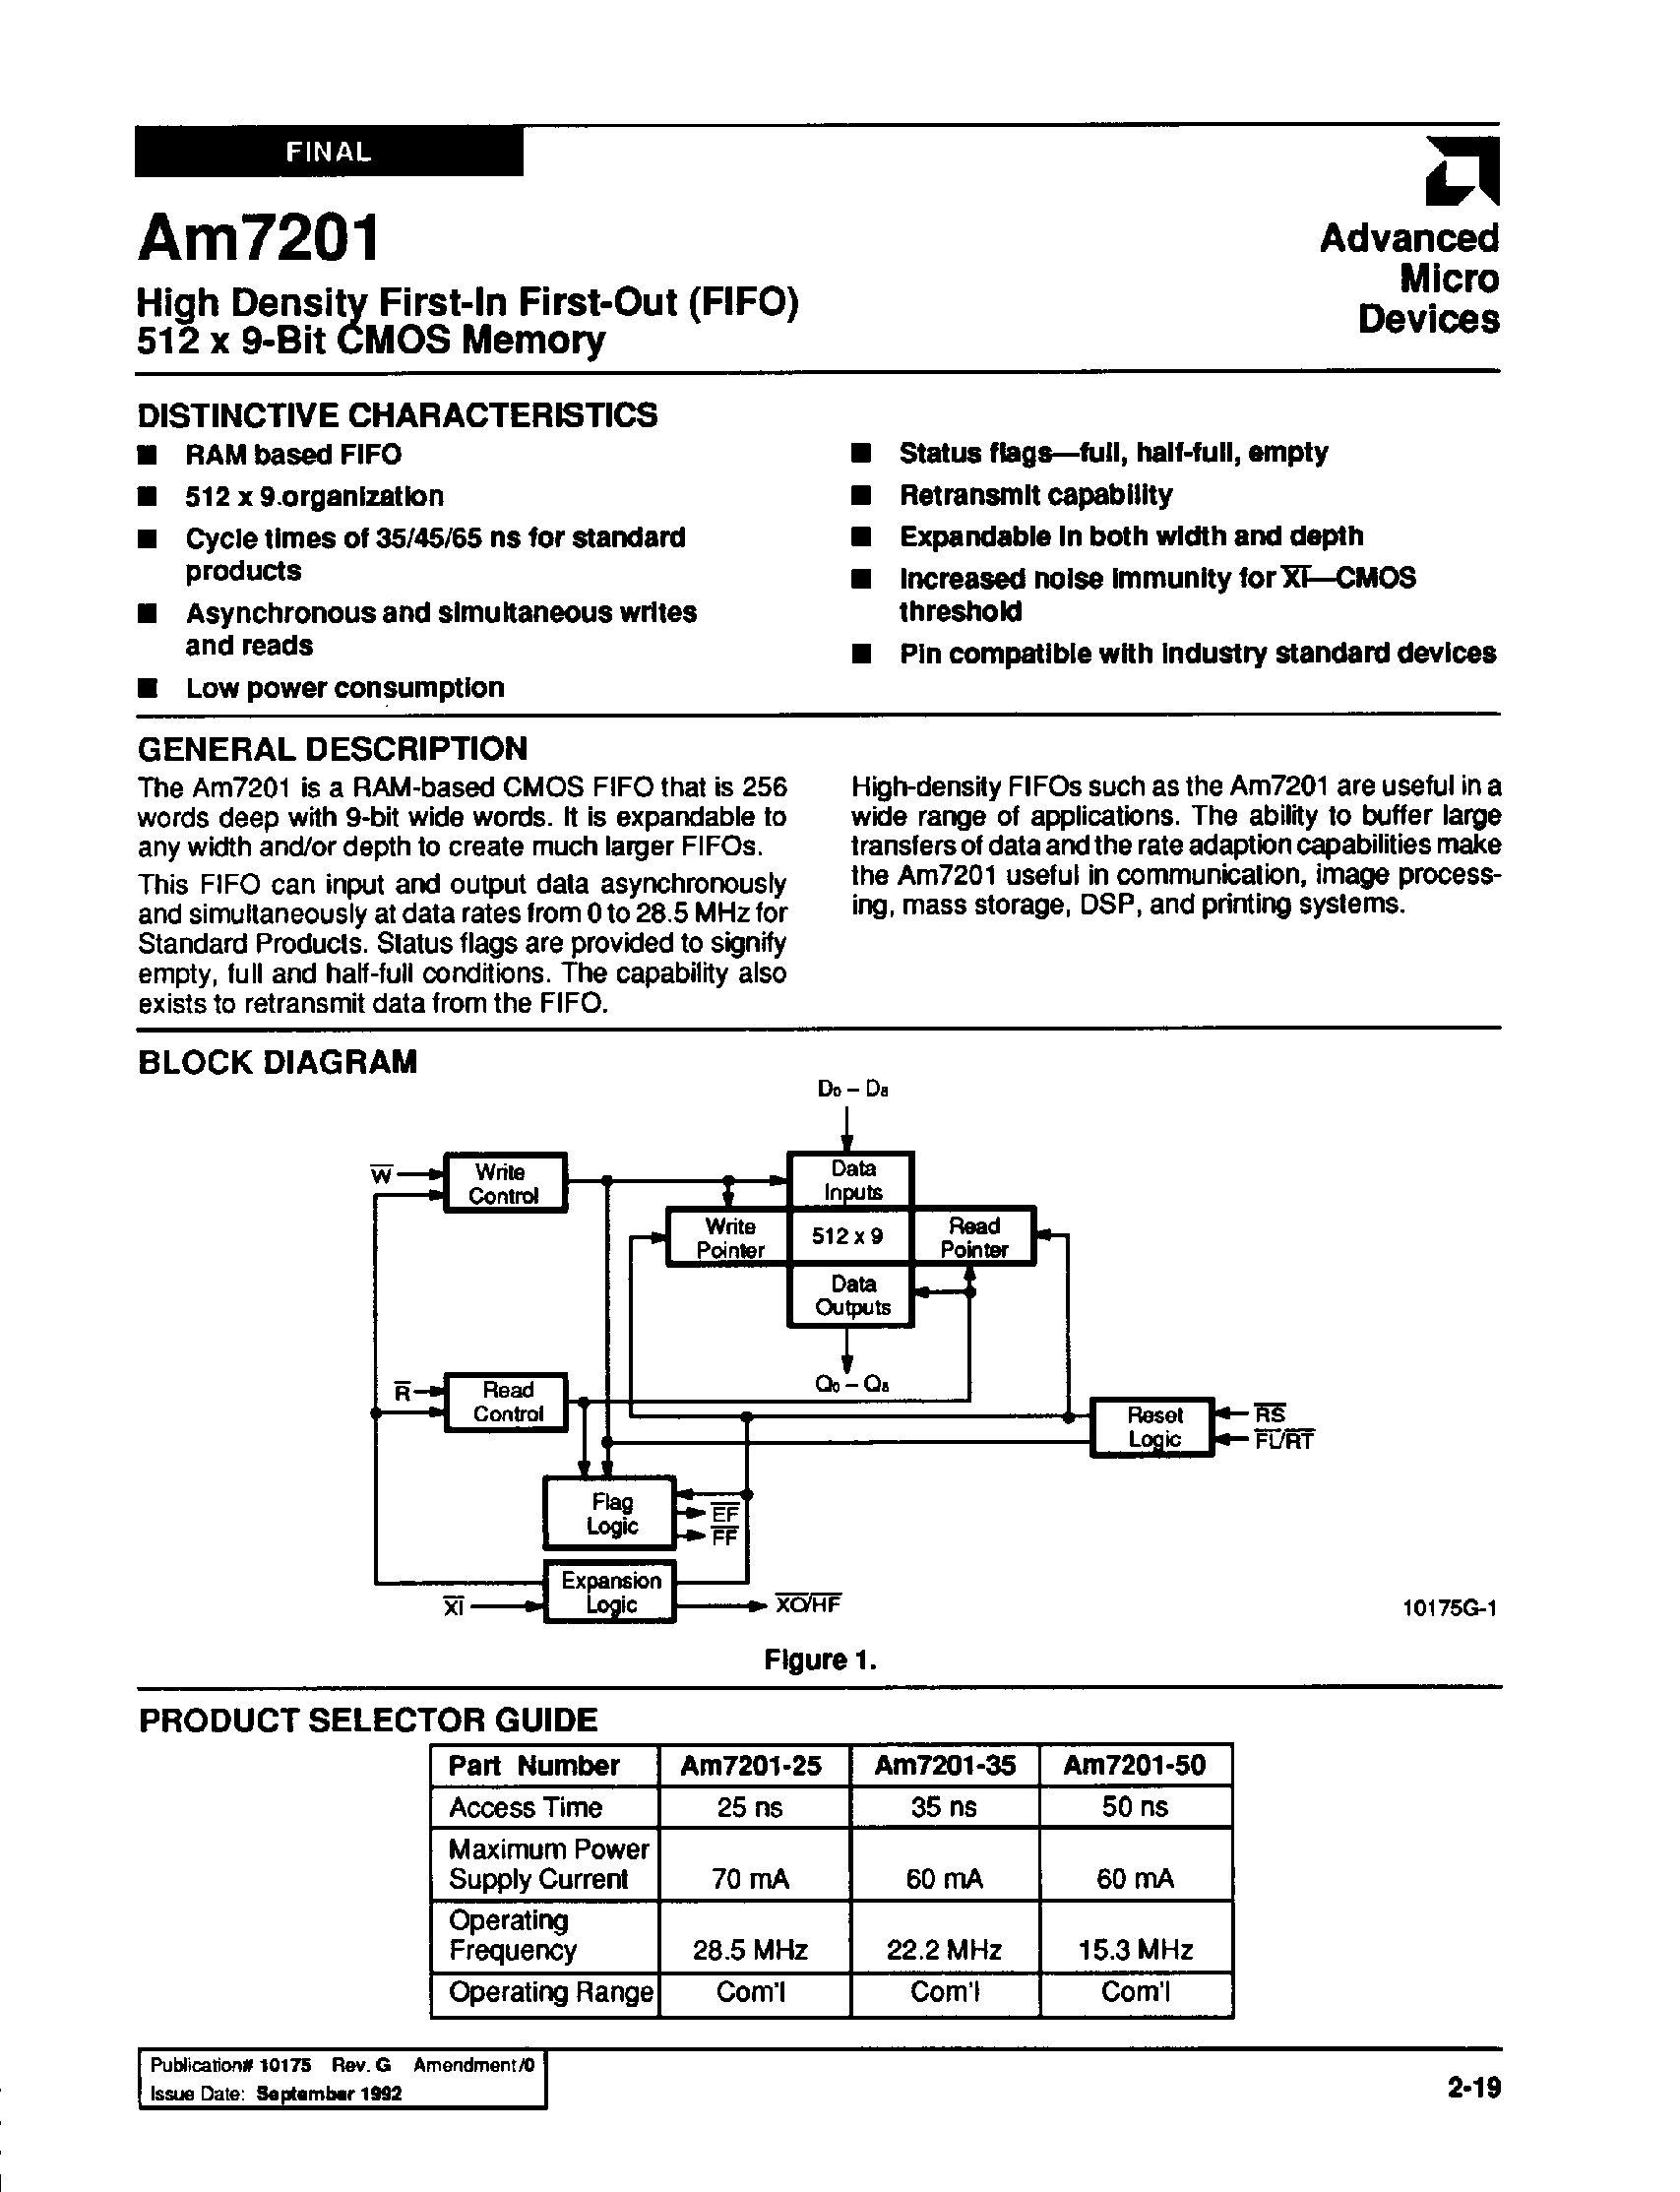 Datasheet Am7201-35RC - HIGH DENSITY FIRST-IN FIRST-OUT(FIFO) 512 x 9-BIT CMOS MEMORY page 1